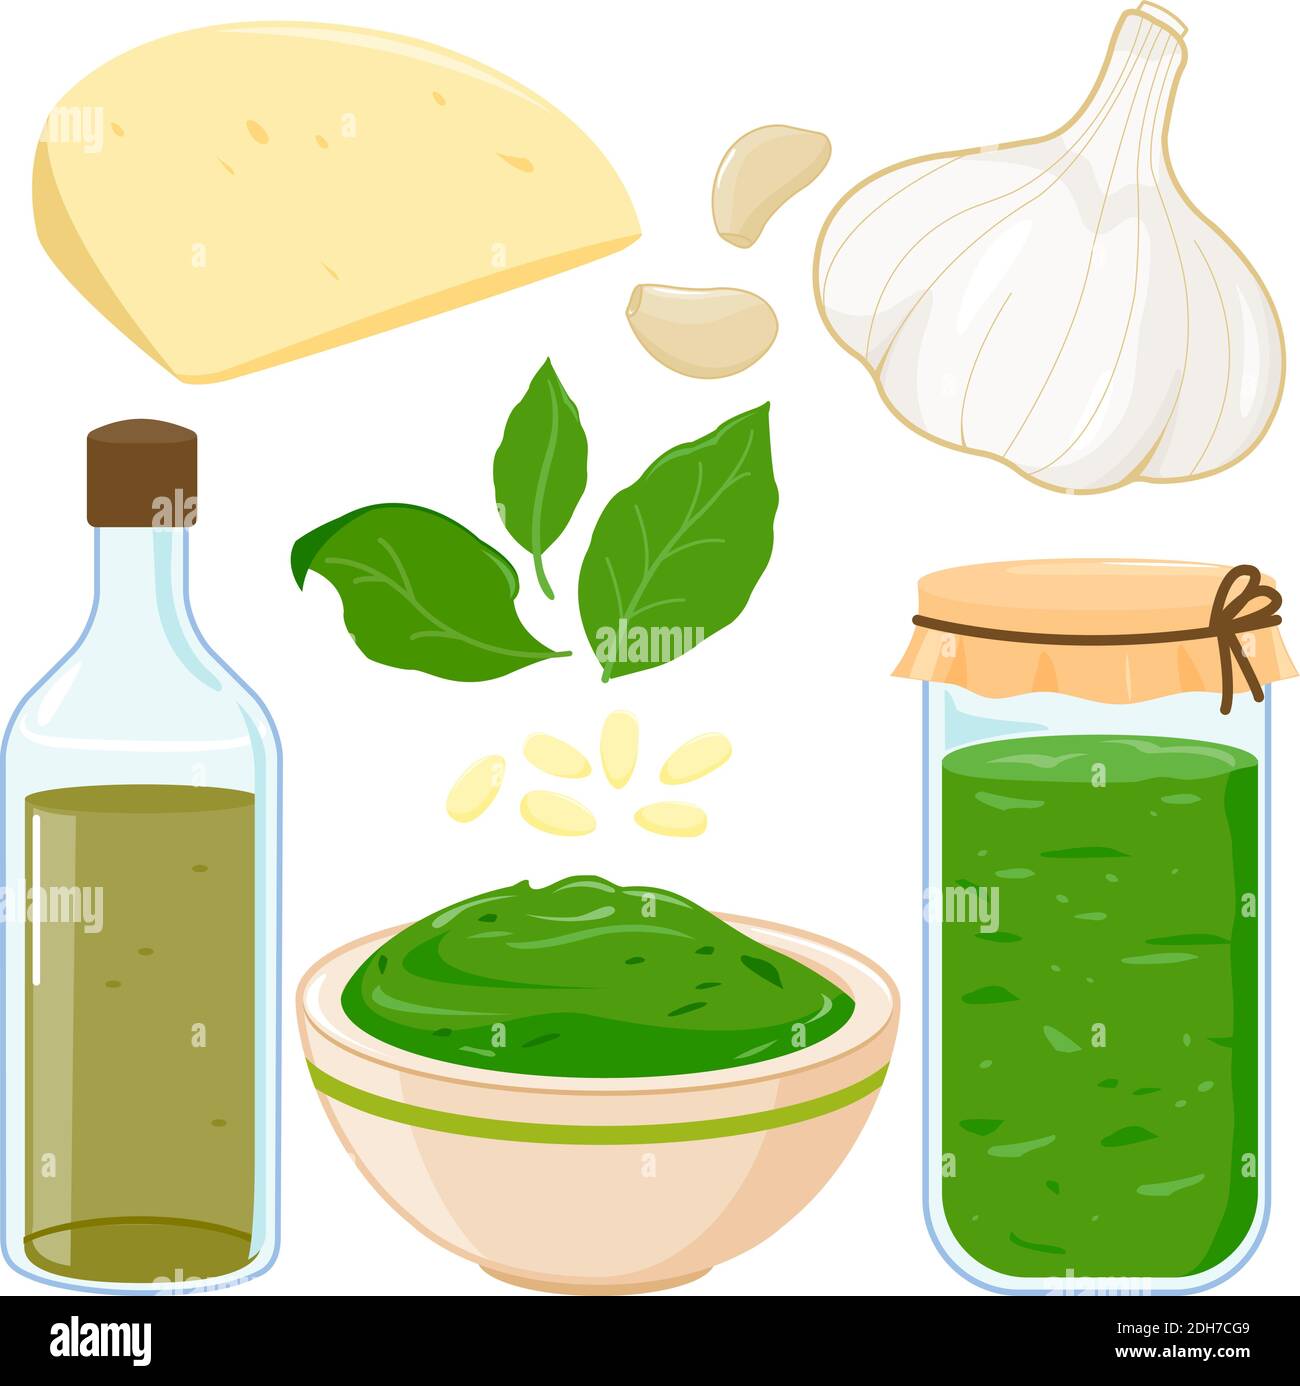 Ingredients for traditional Italian pesto sauce, bowl and jar of pesto dip. Vector illustration Stock Vector